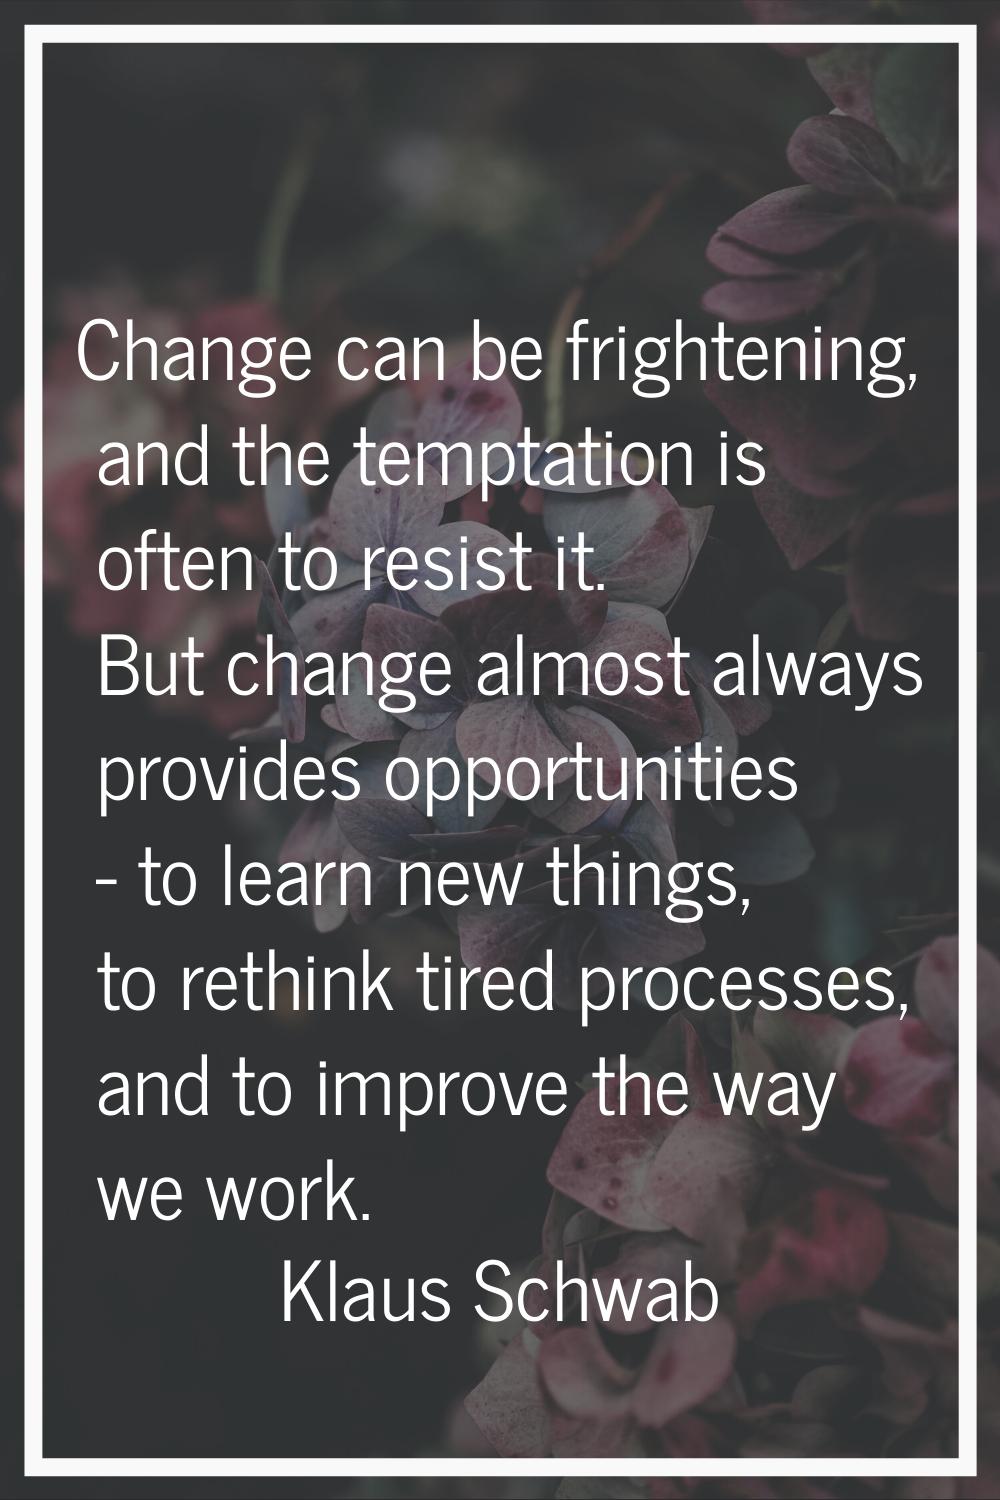 Change can be frightening, and the temptation is often to resist it. But change almost always provi